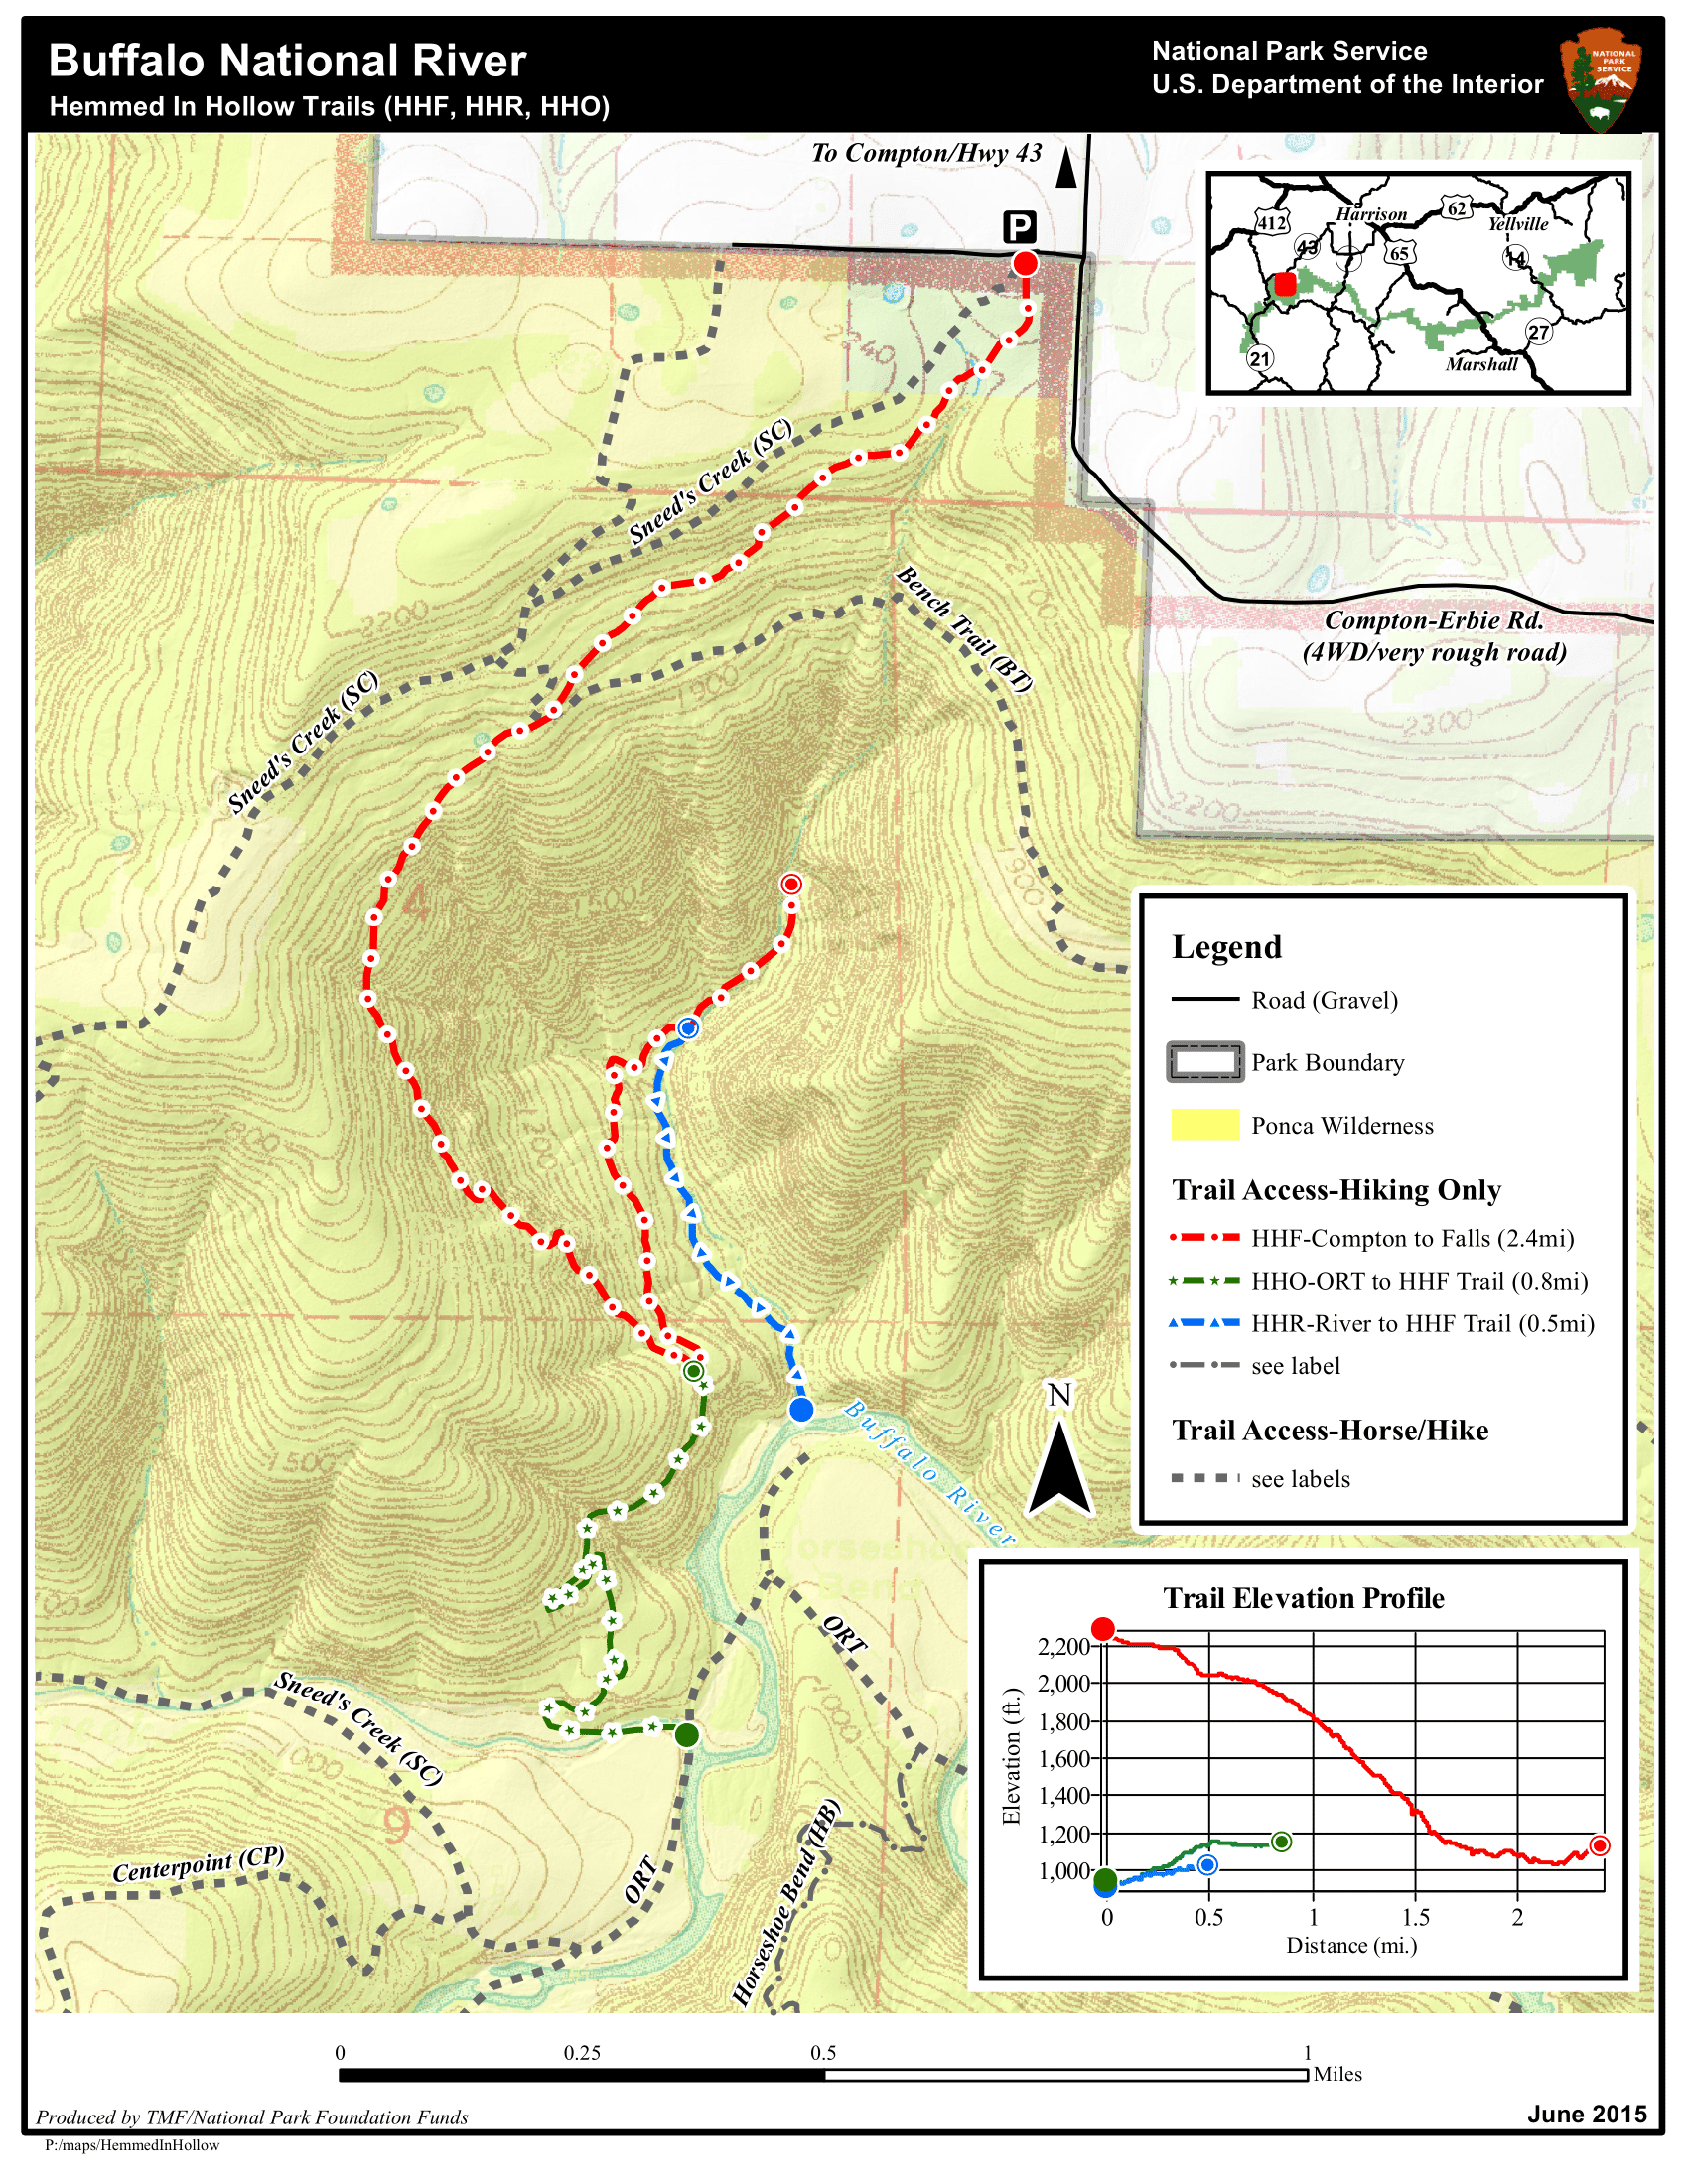 A detailed map of the Hemmed-in Hollow Trail